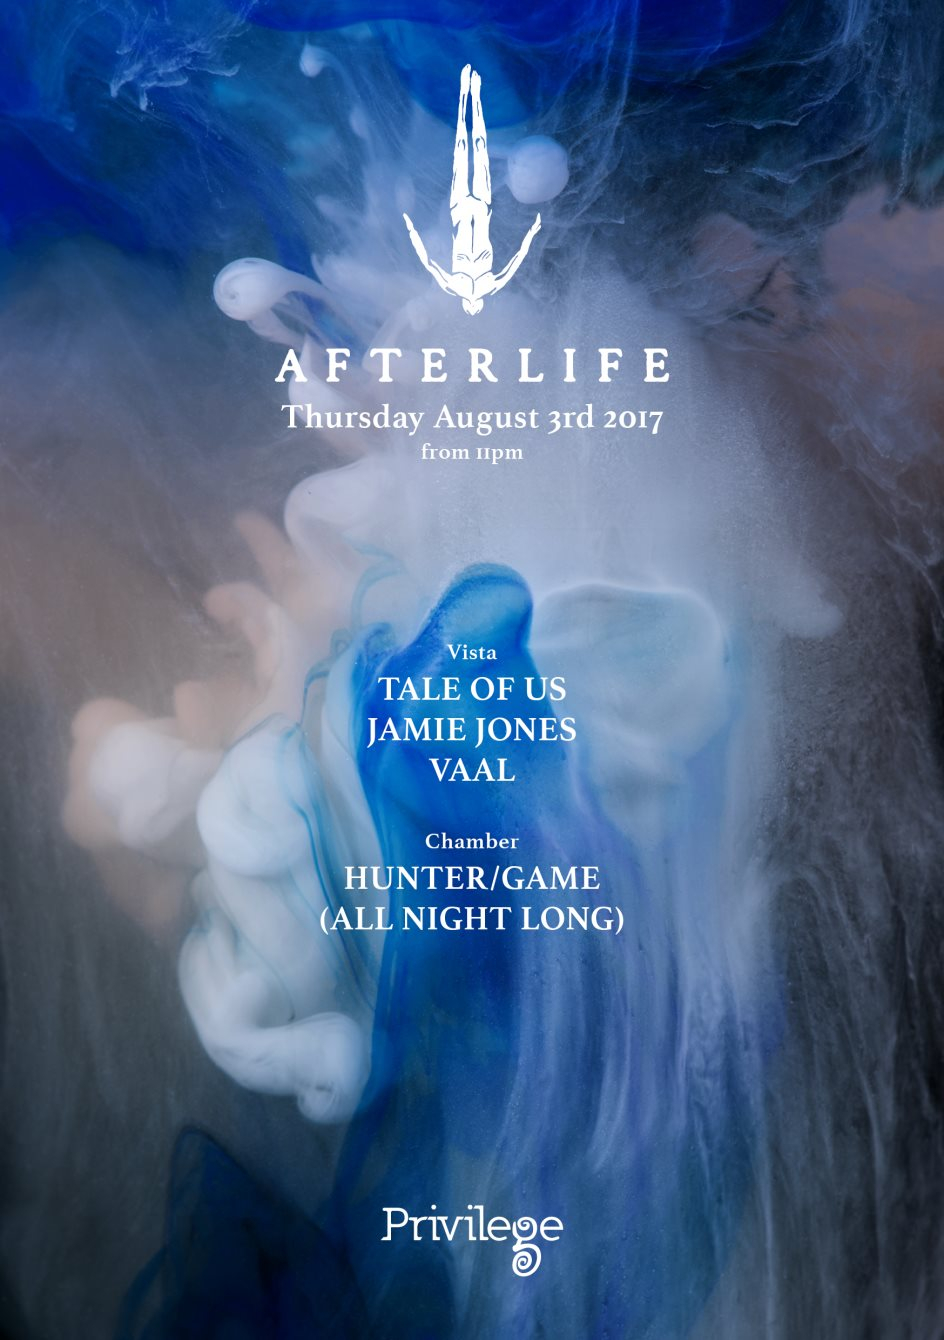 Afterlife Mix - Summer Ibiza 2020 (Extended Set) 